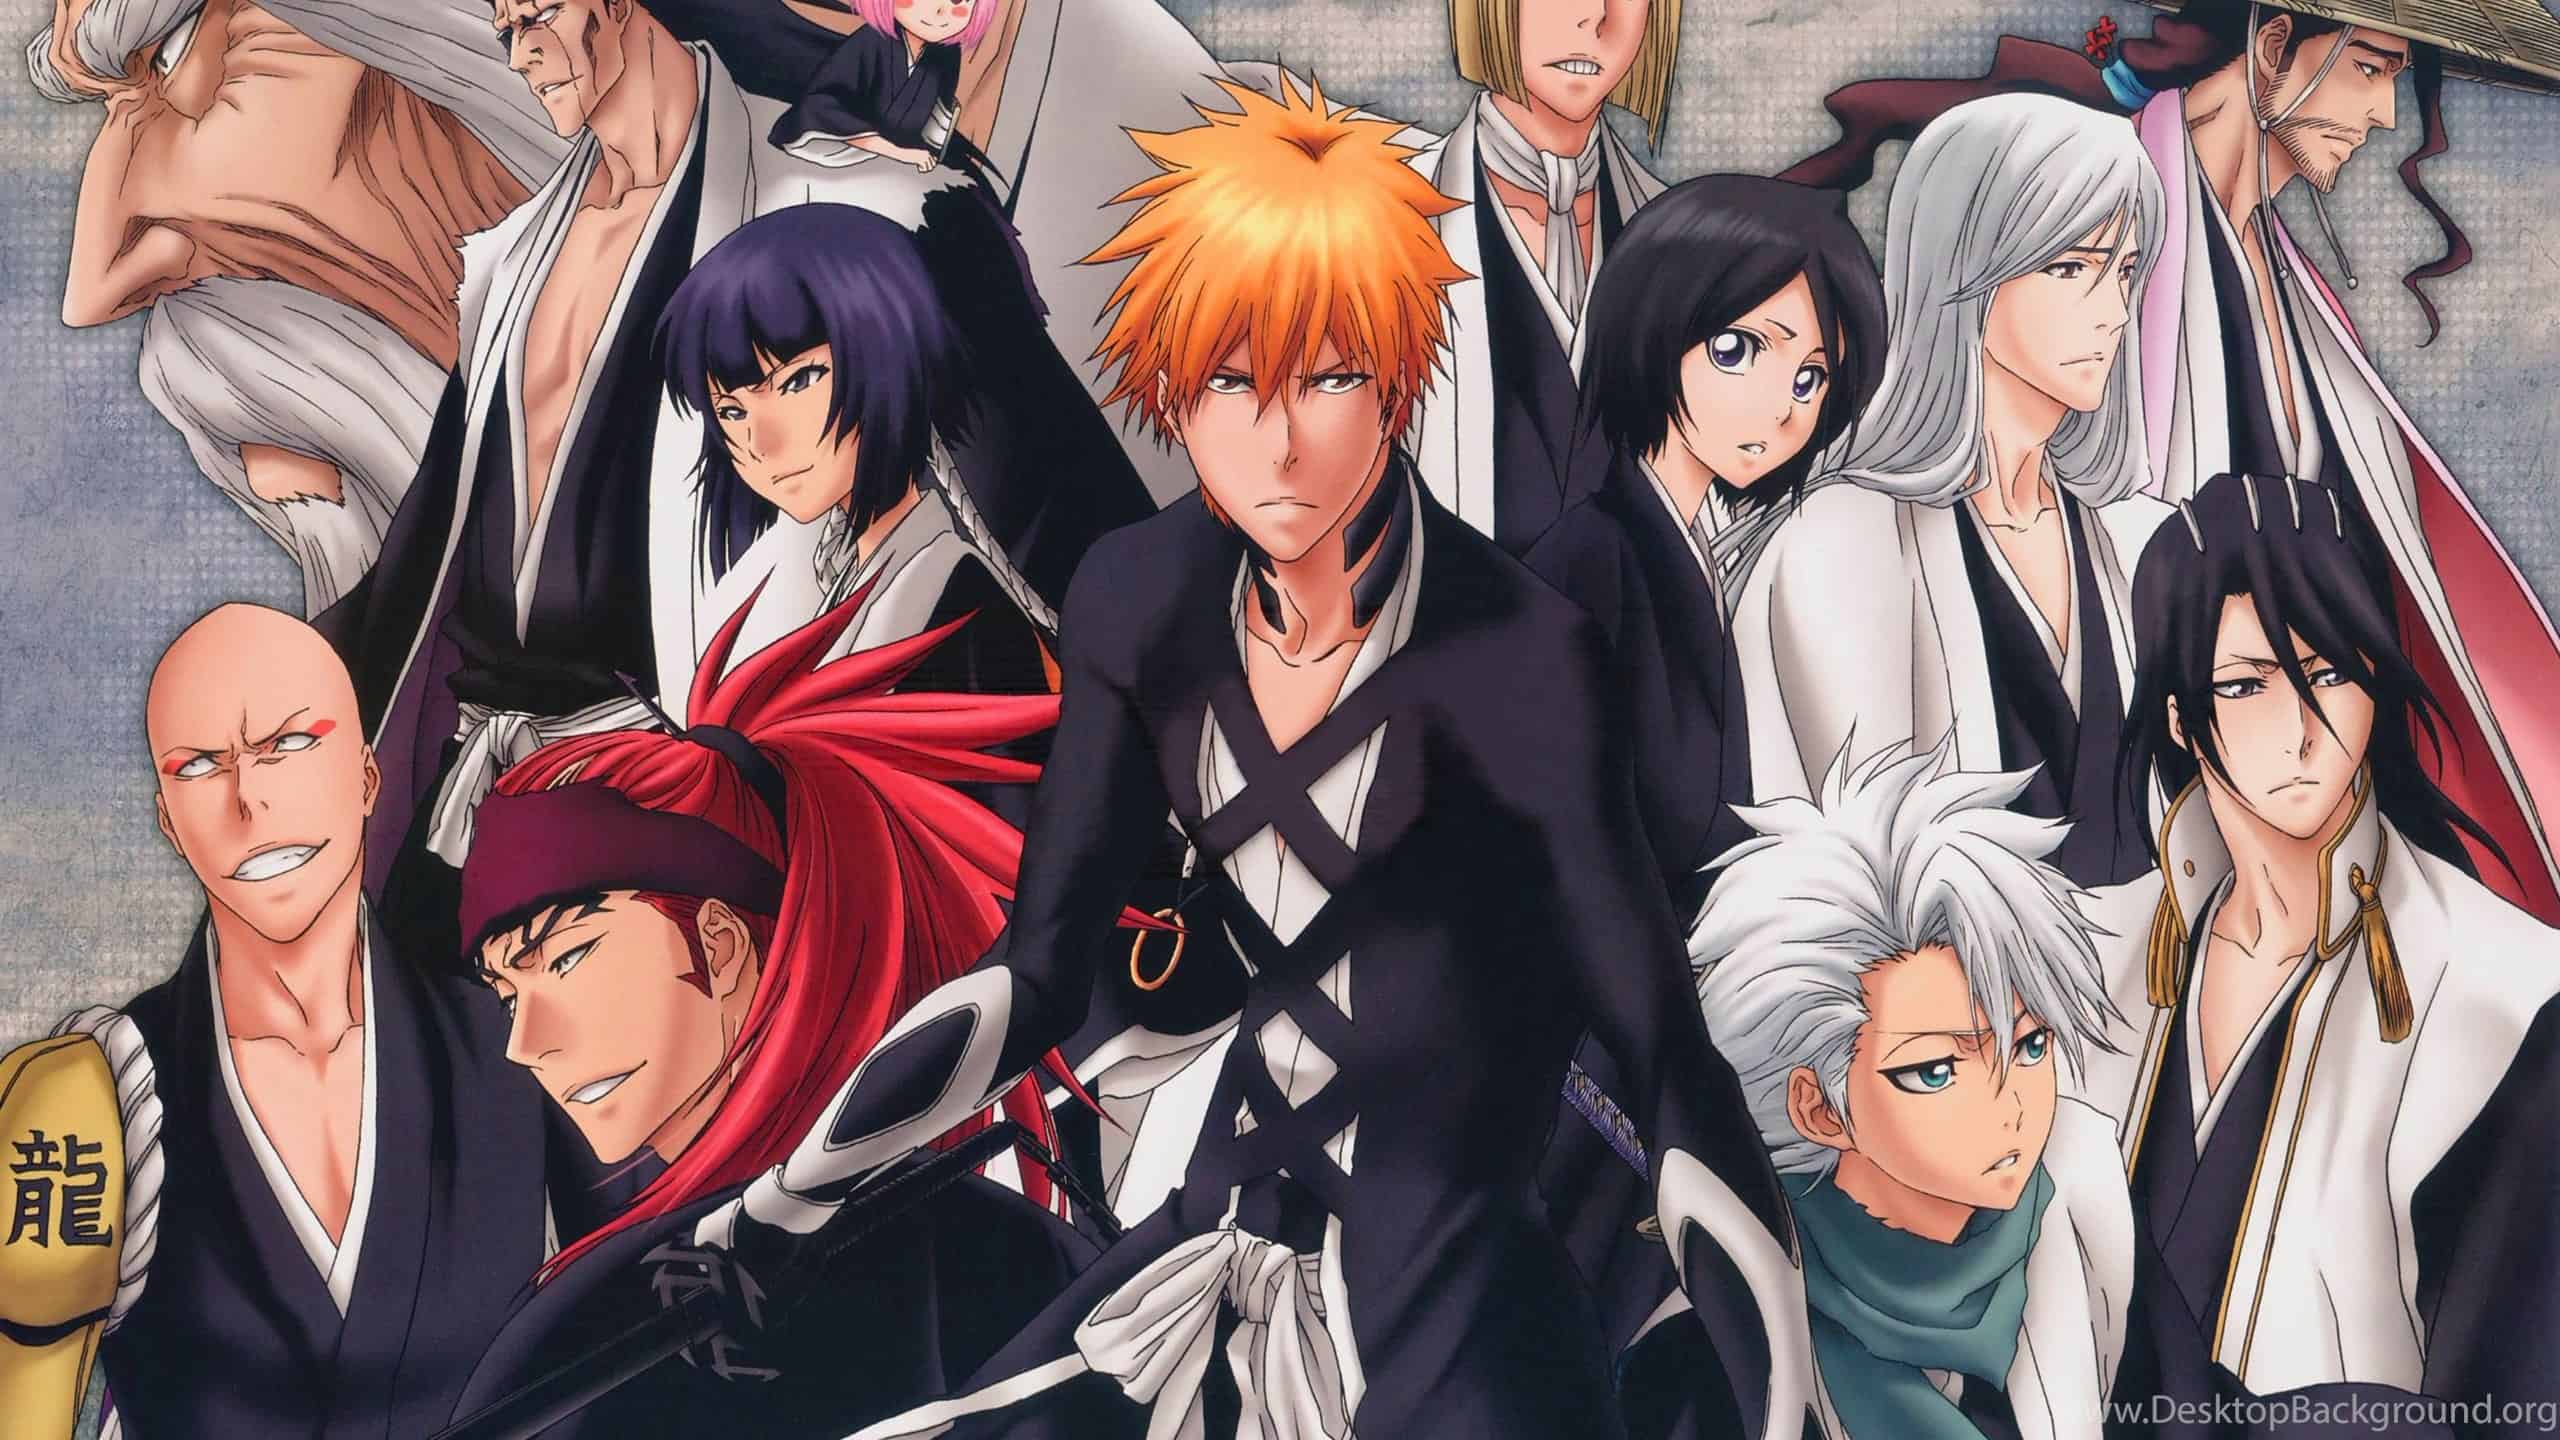 Bleach: 5 Characters With The Scariest Powers